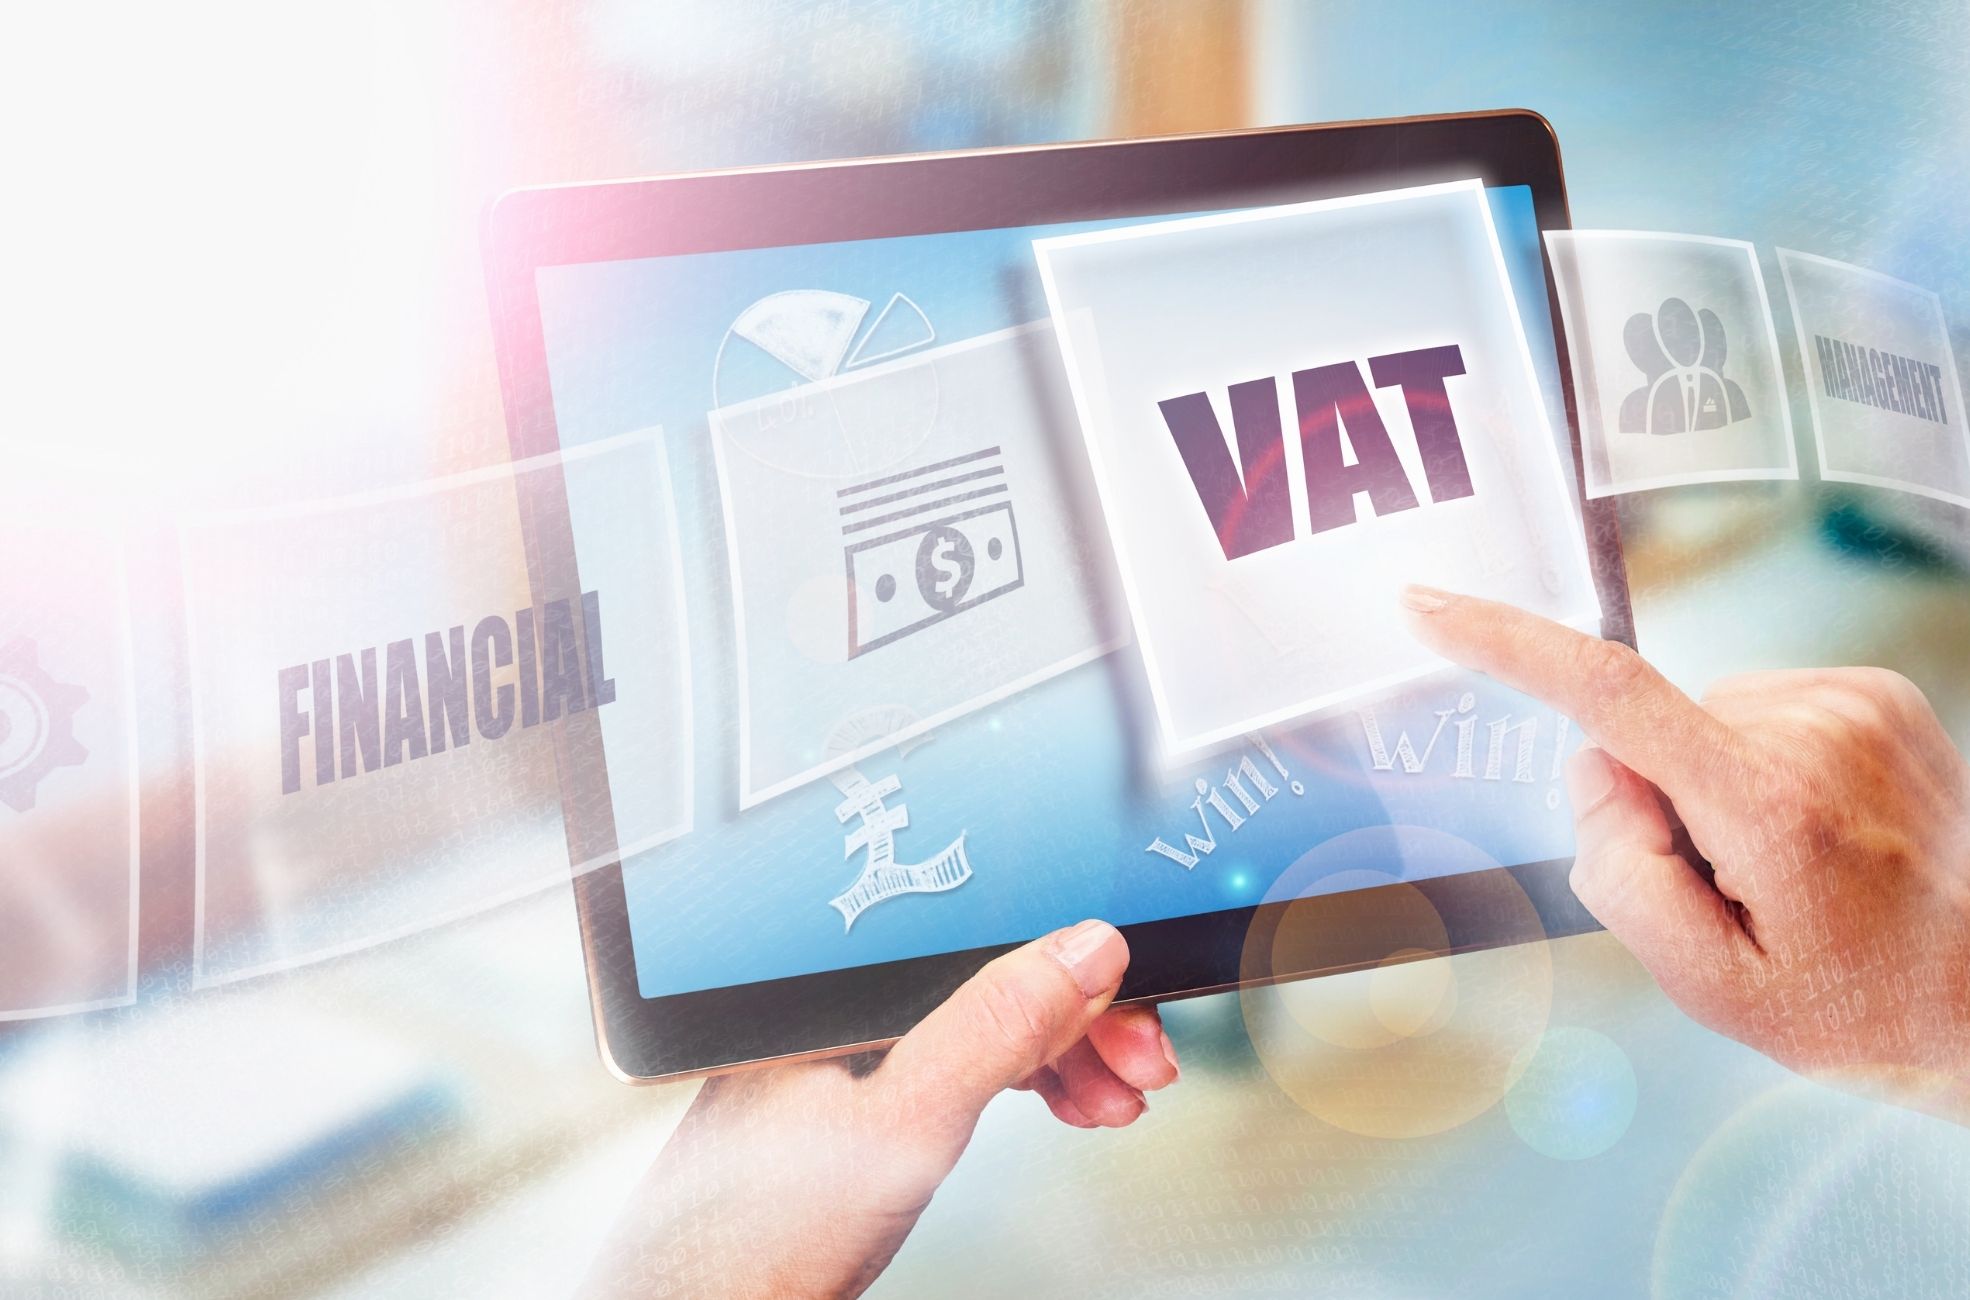 Tablet Being Used For VAT Tax